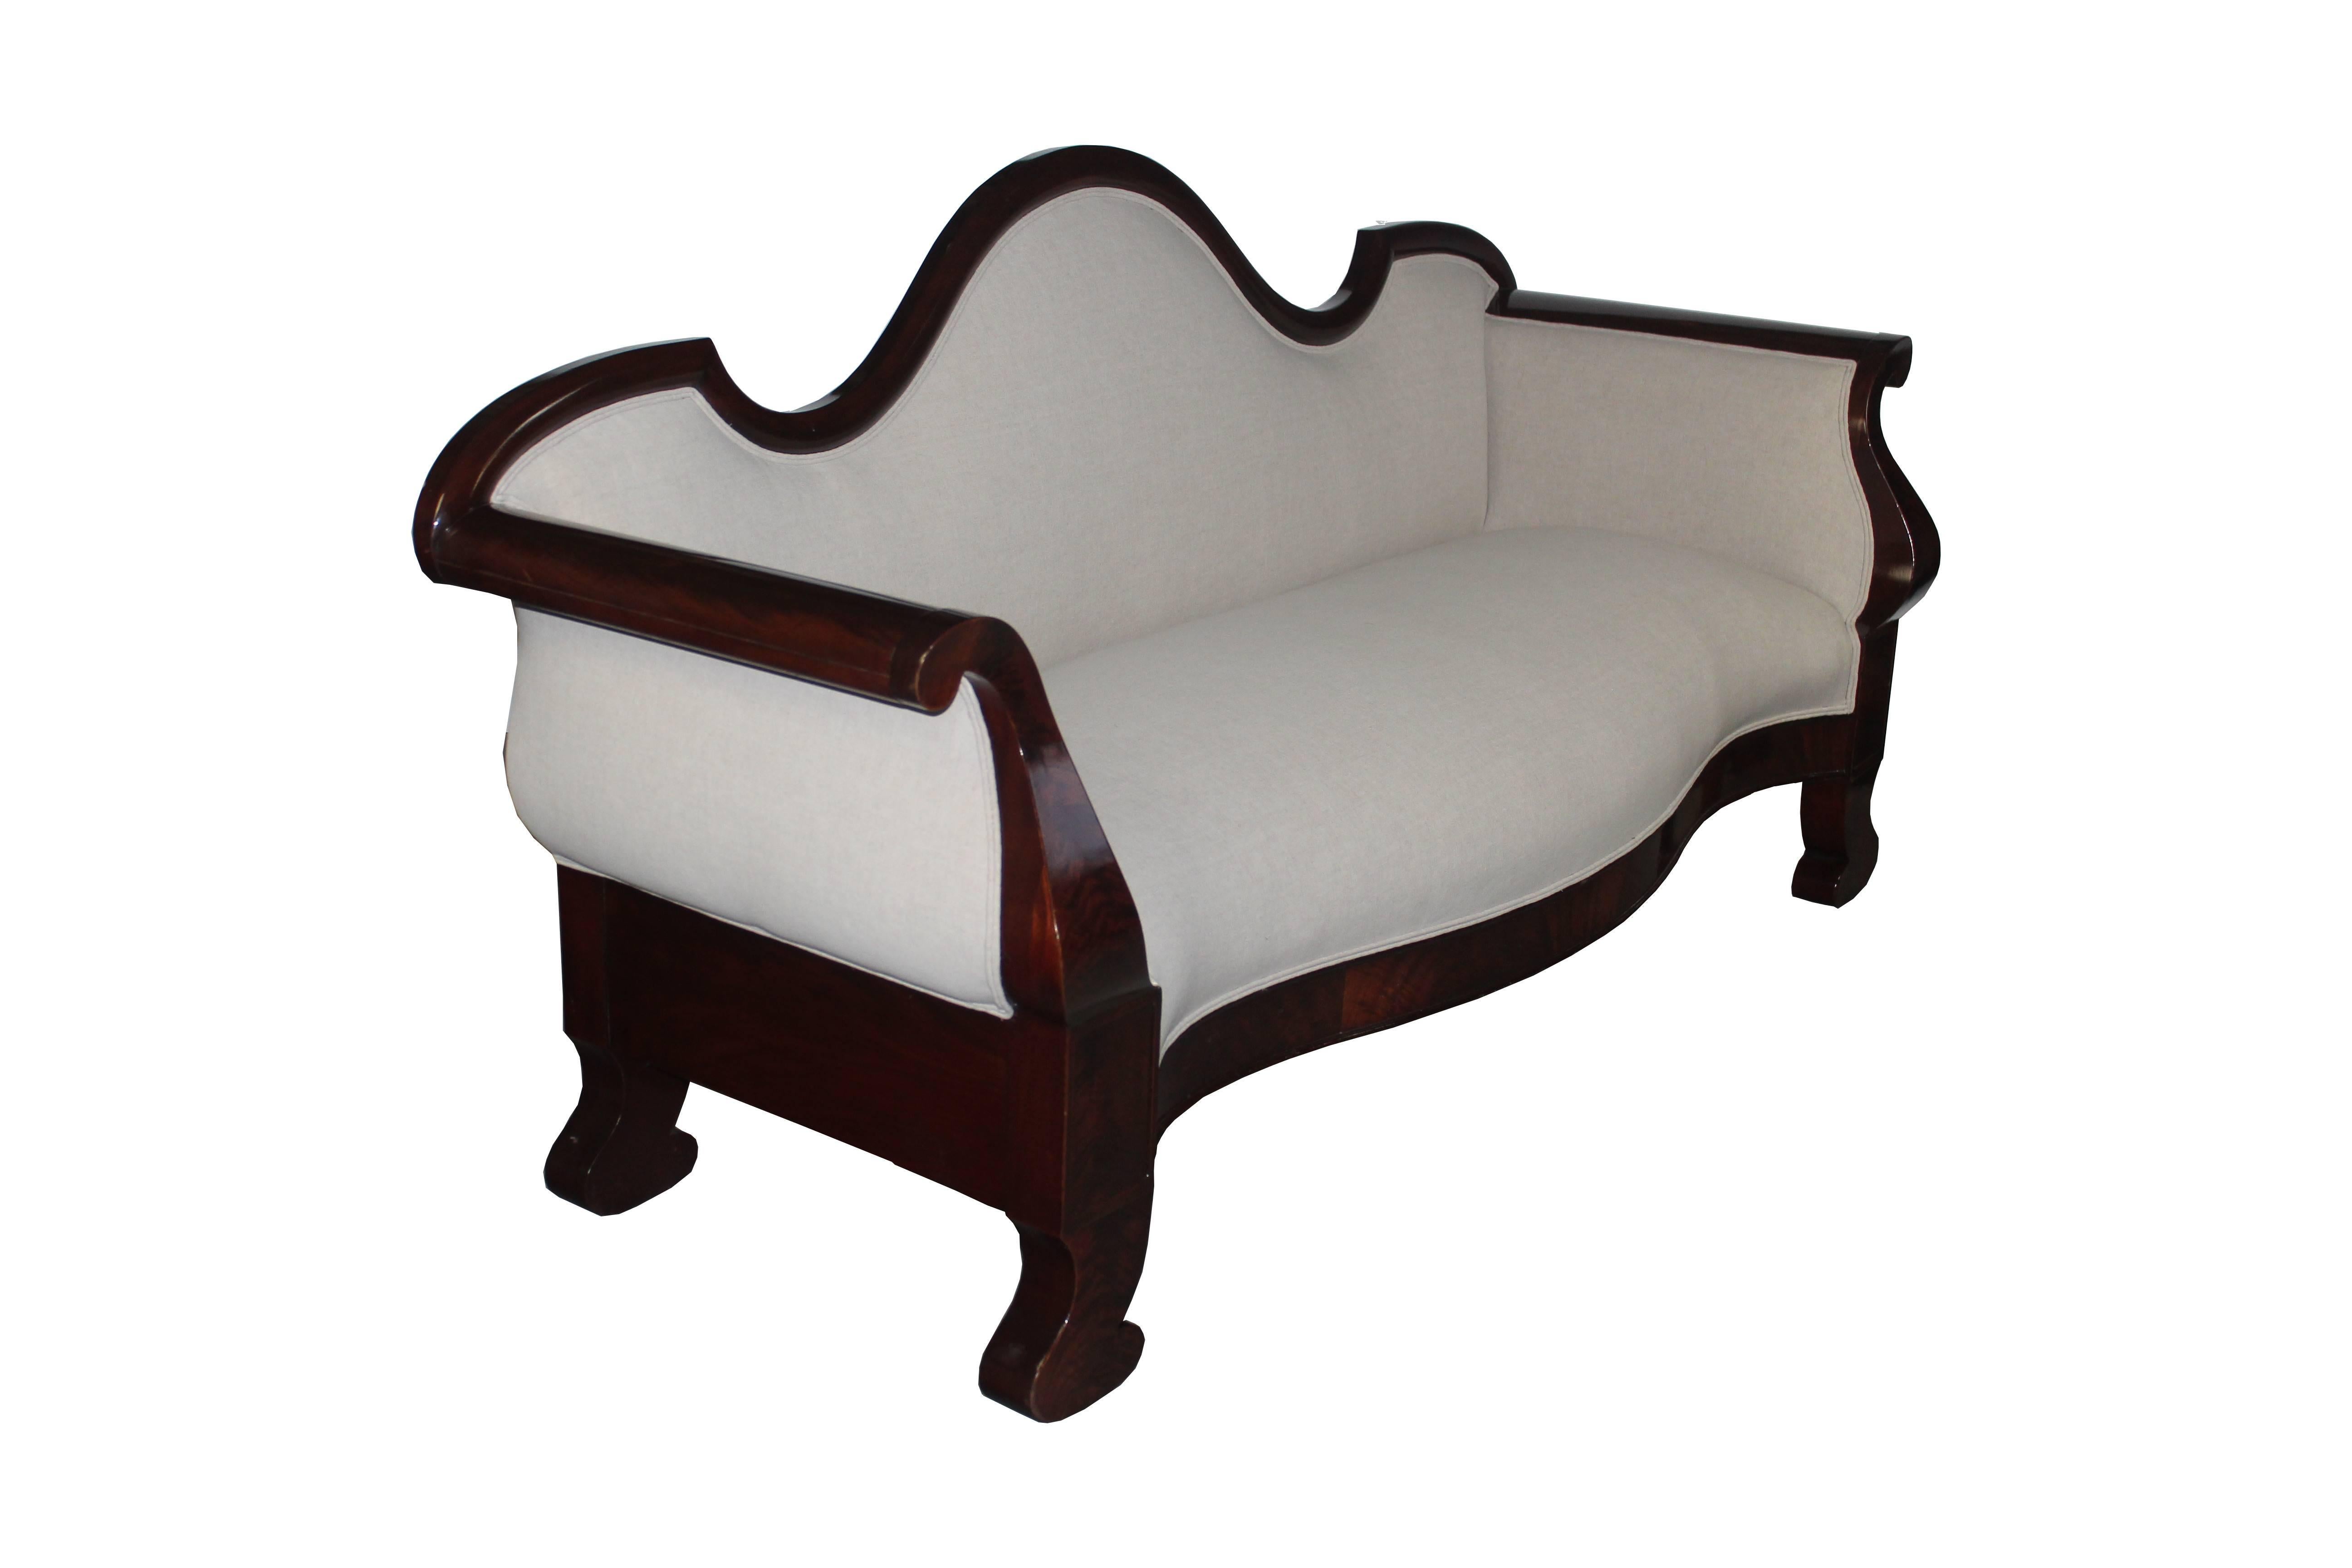 Beautiful 19th century mahogany sofa with plain lines. Upholstered in light gray linen.